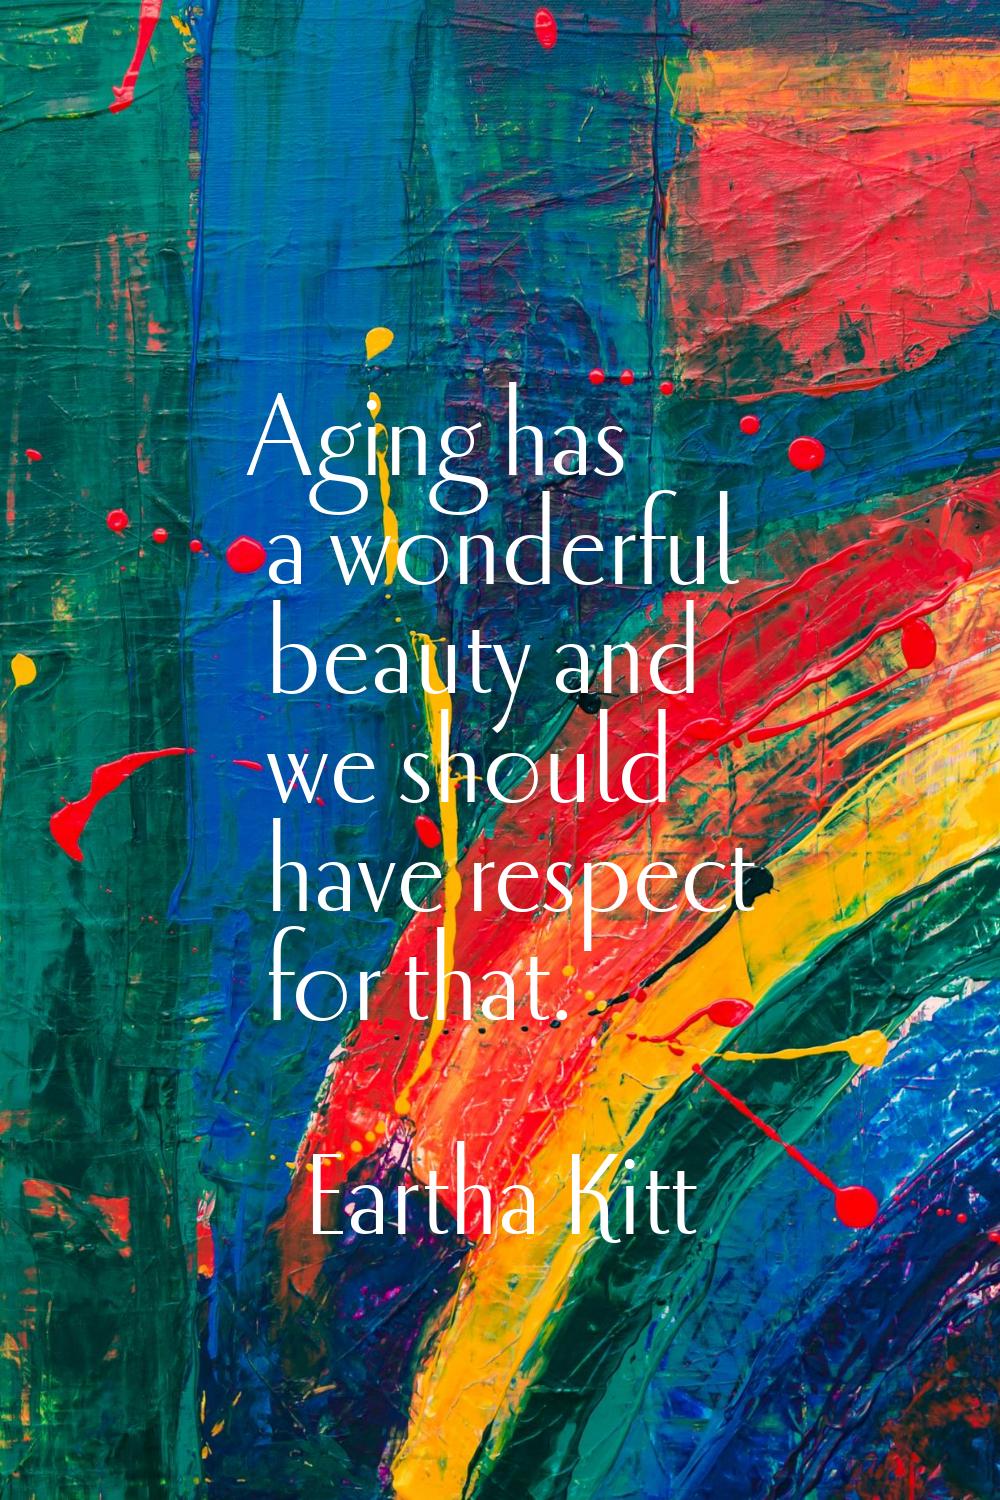 Aging has a wonderful beauty and we should have respect for that.